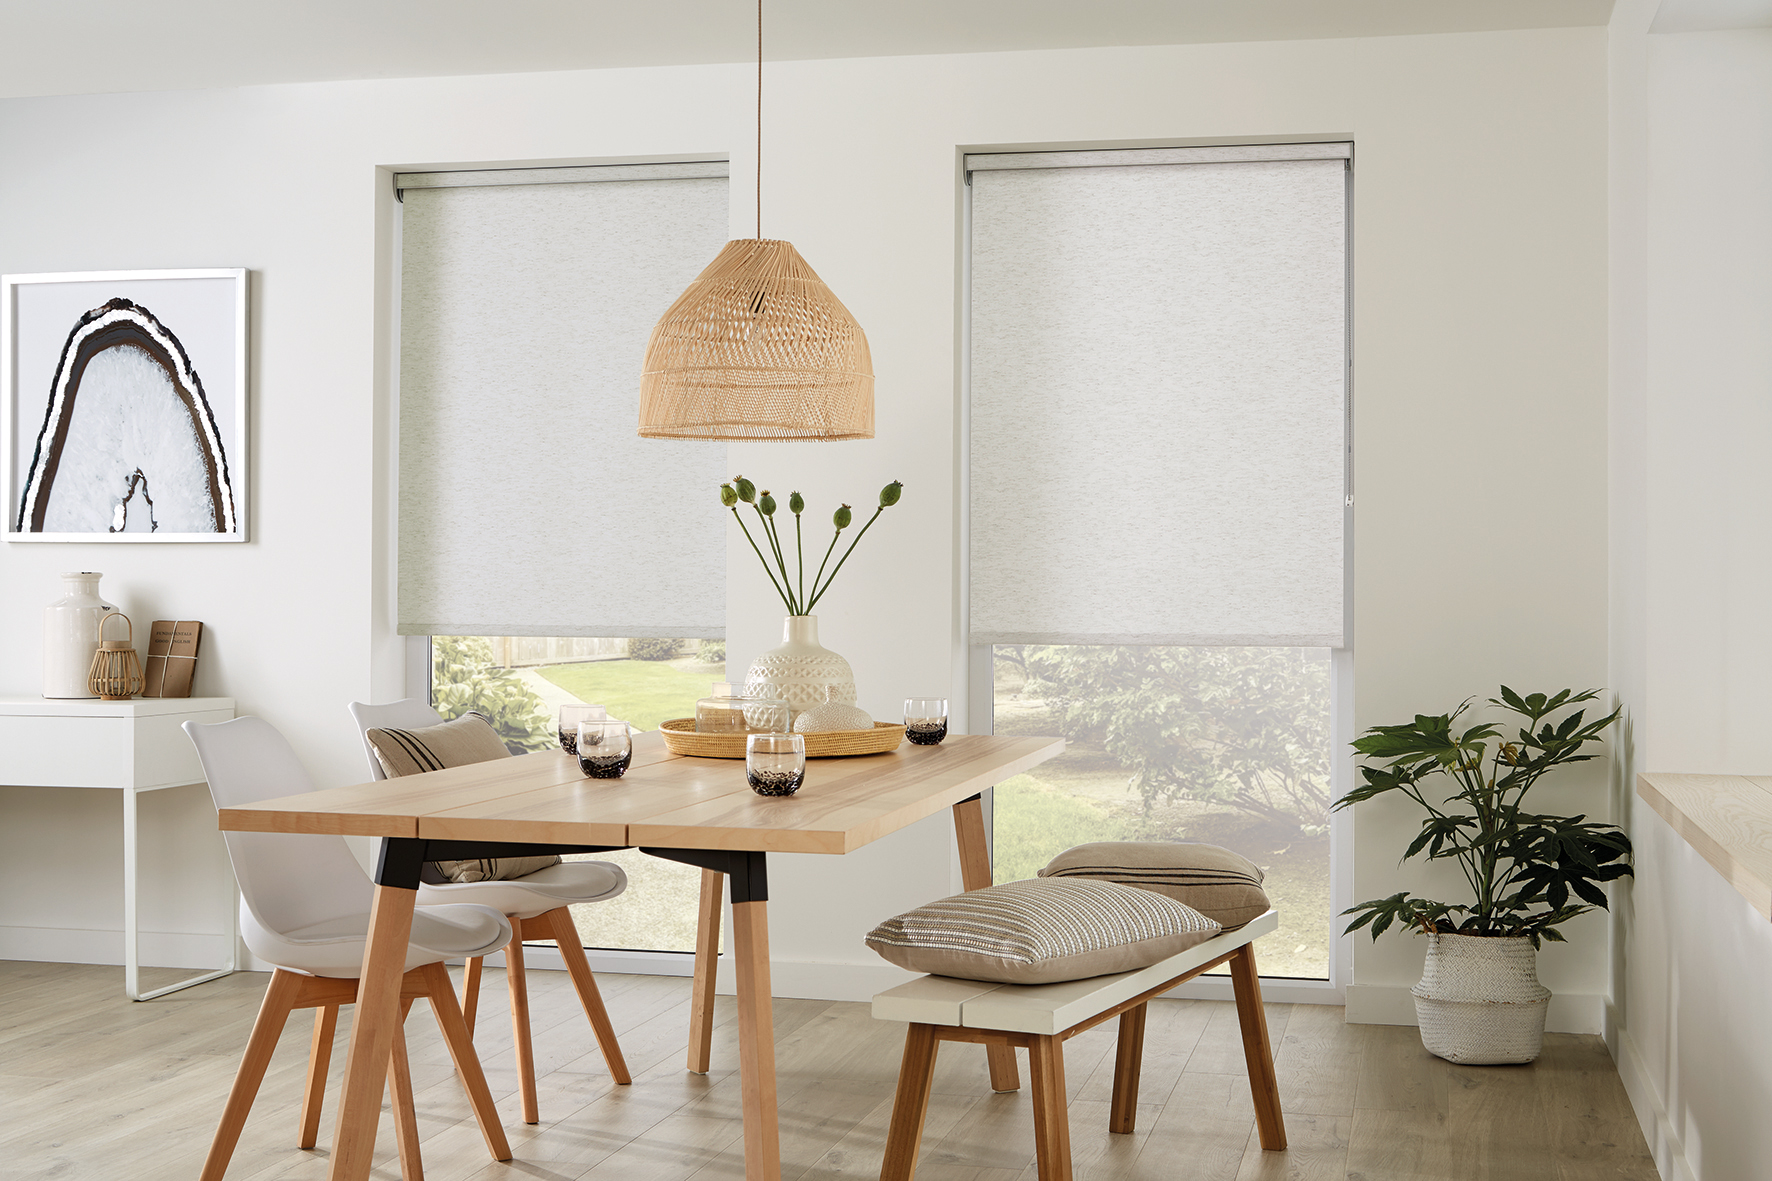 Difference between Senses Roller and Roller Blinds